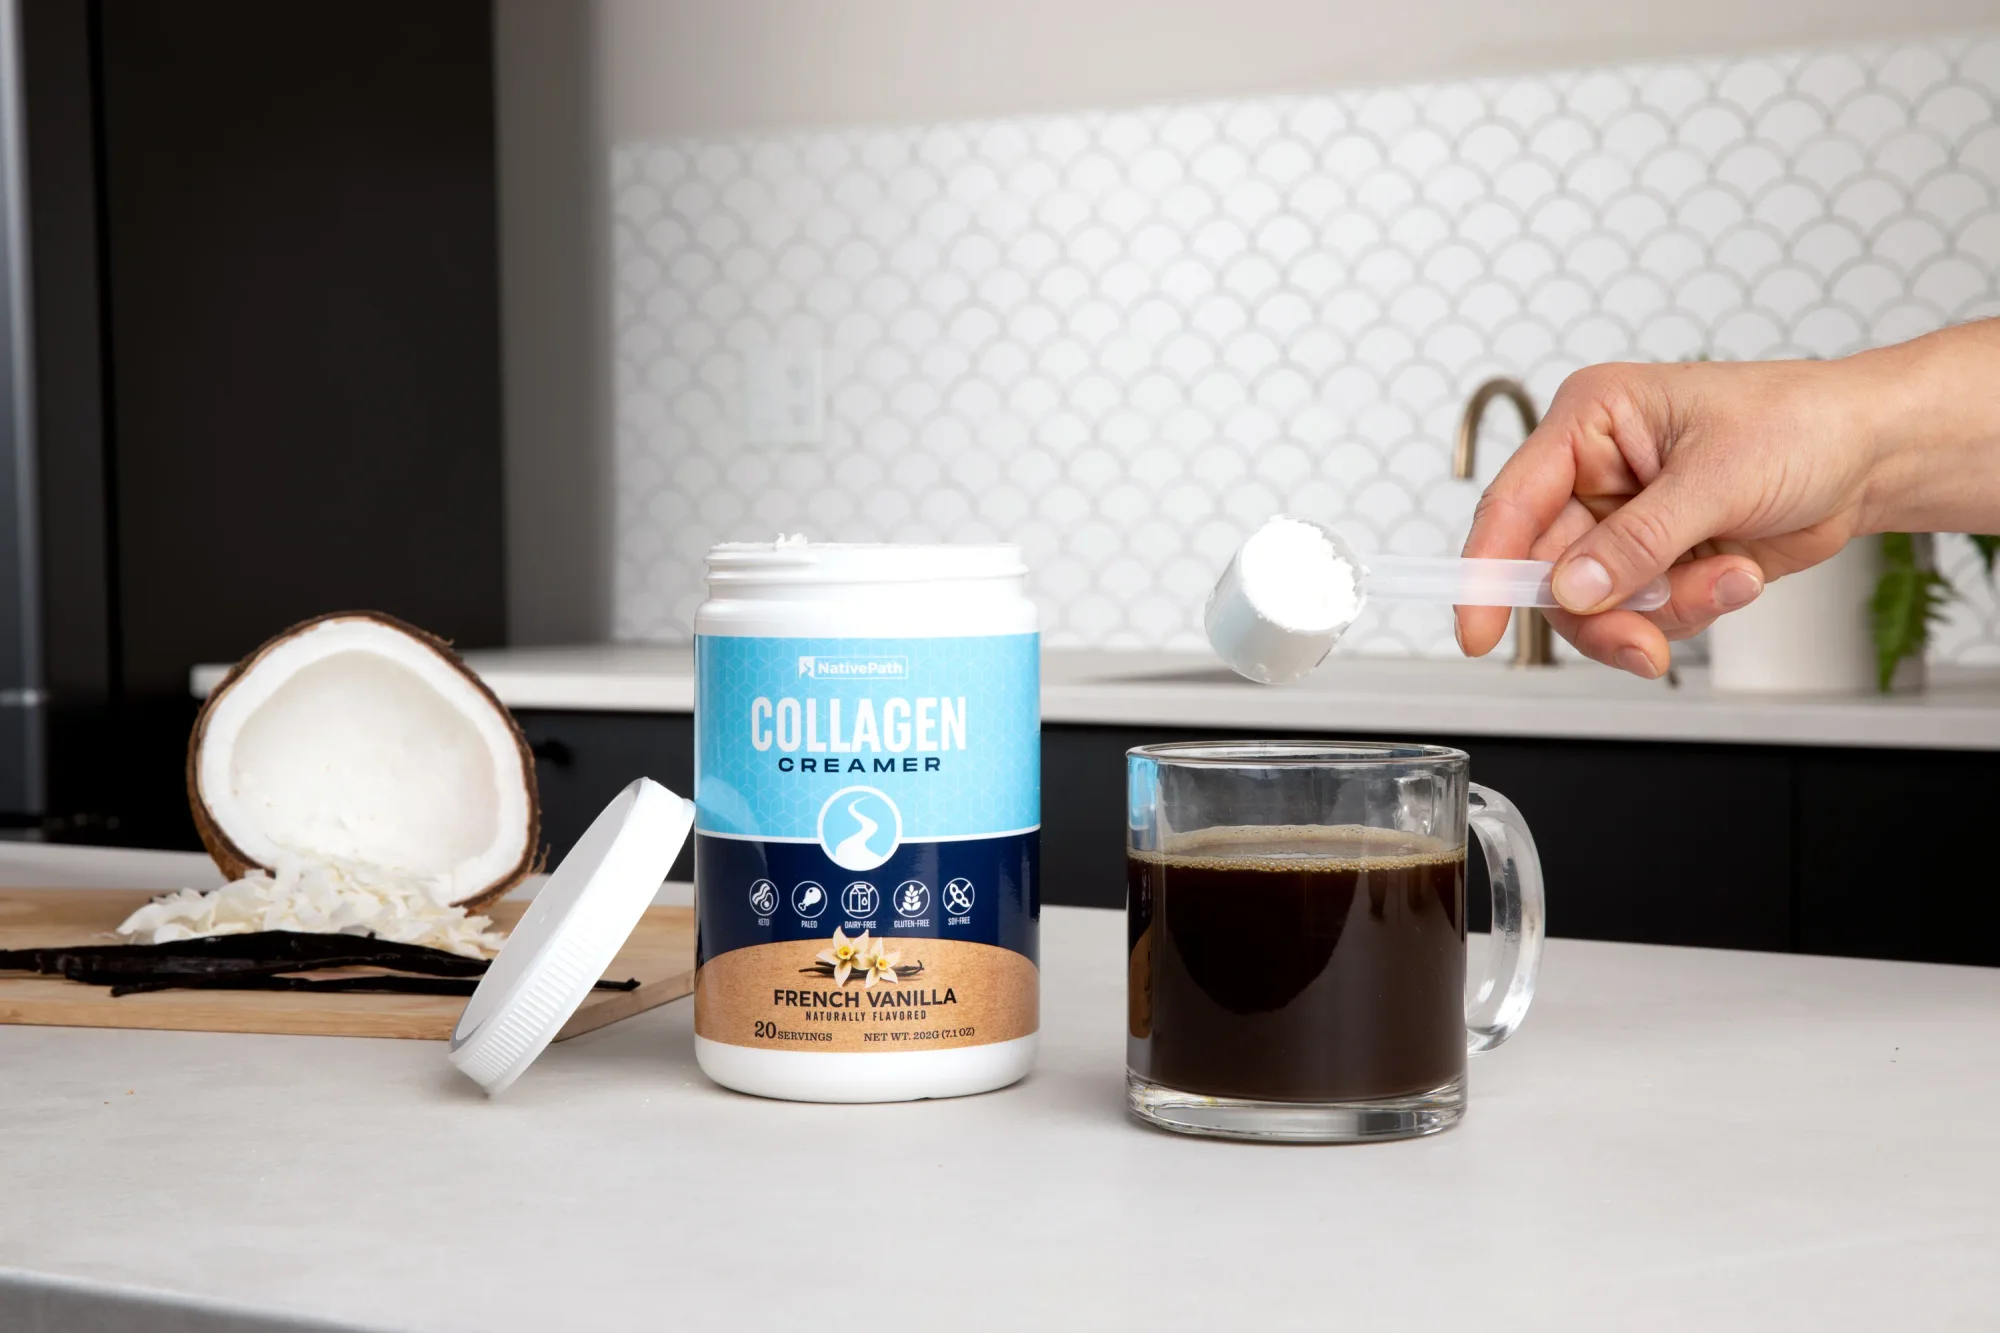 Hand adding a scoop of NativePath Collagen Creamer to a cup of coffee. Kitchen setting.